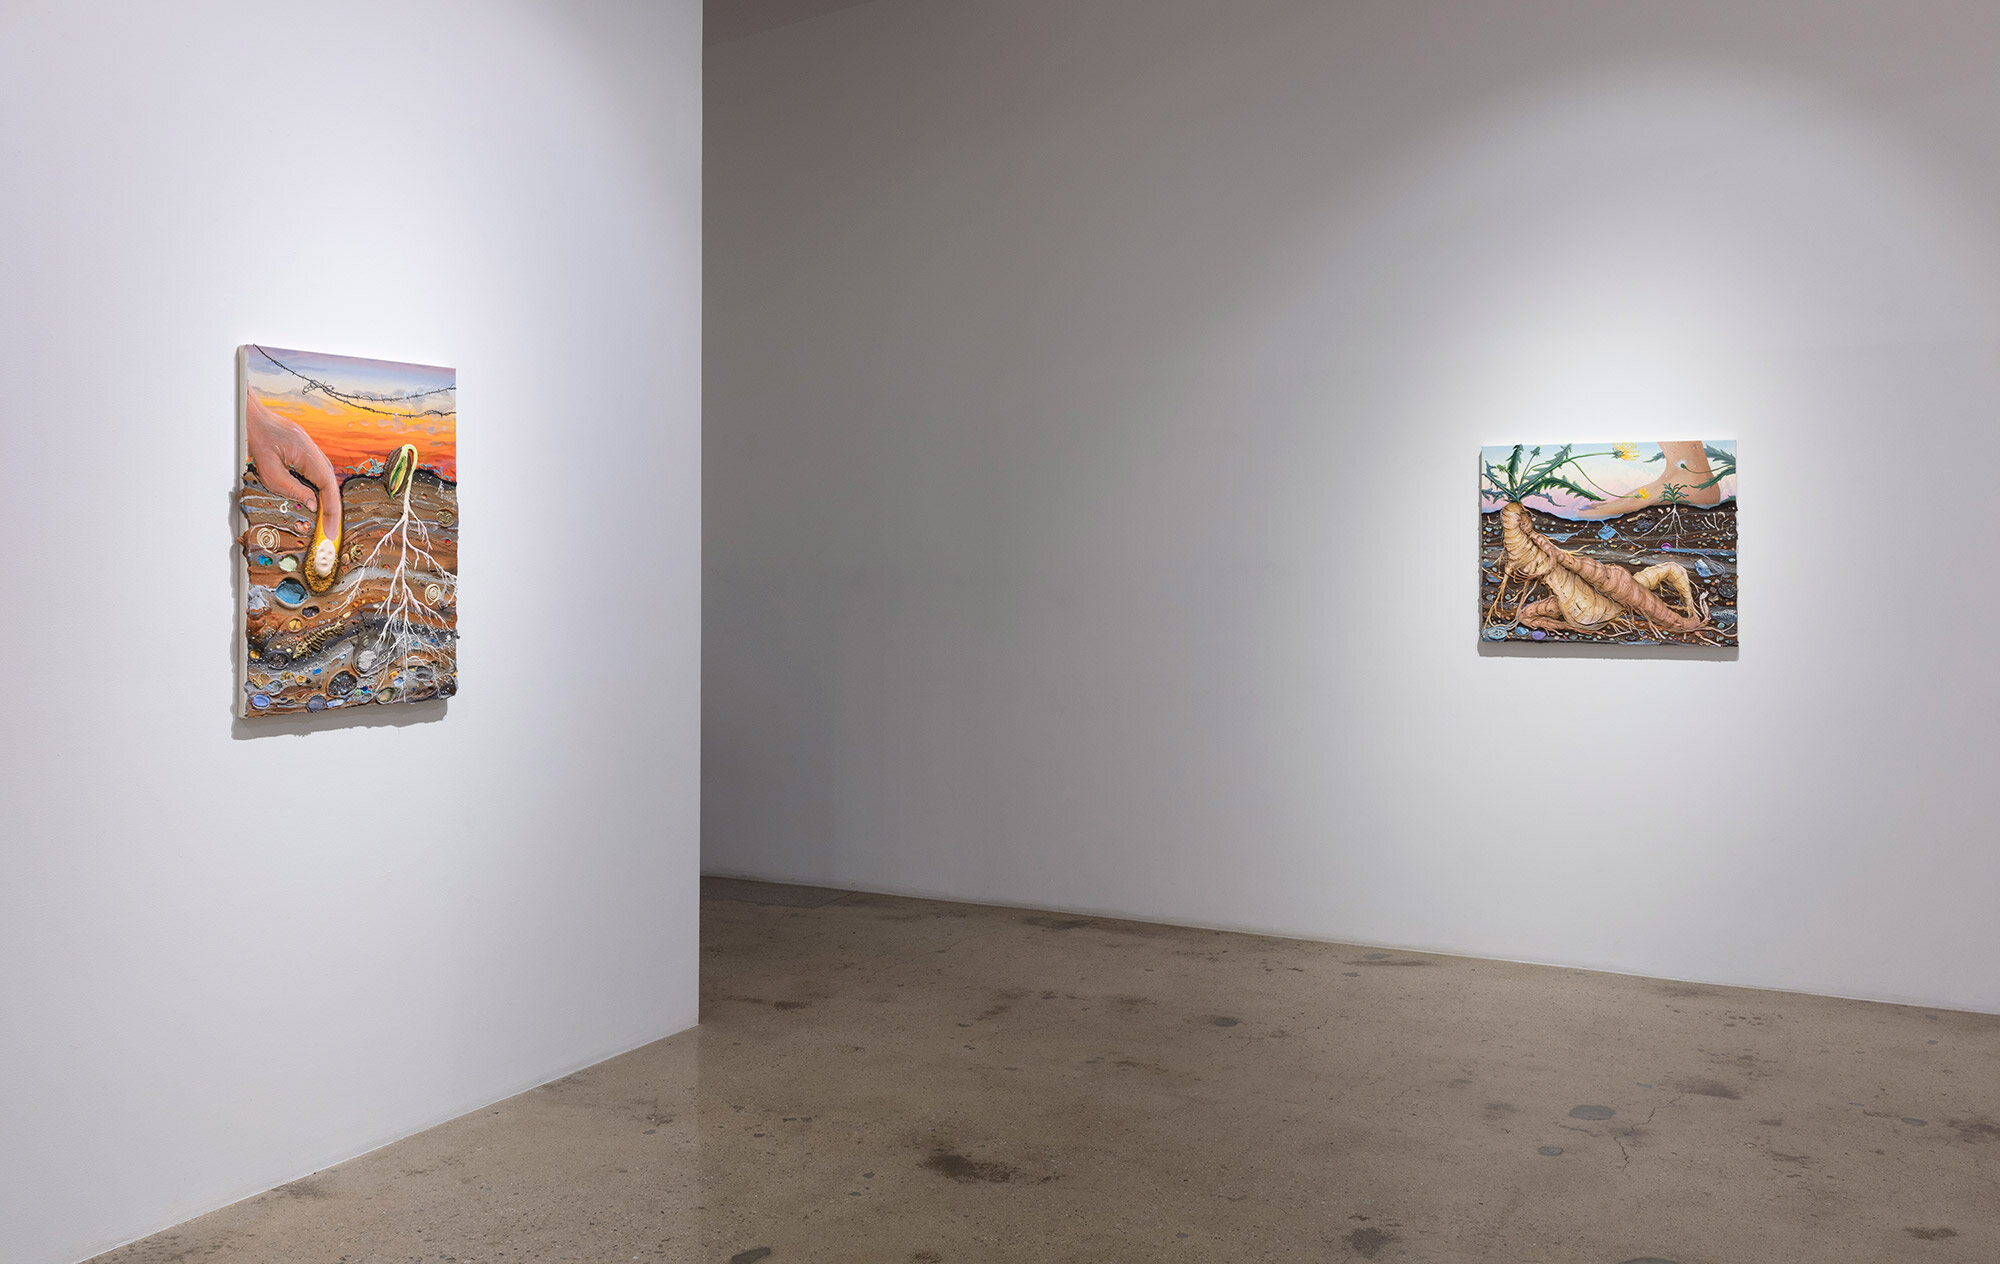  Installation view from “Grown Woman” at Steve Turner, 2021, Los Angeles, California.  